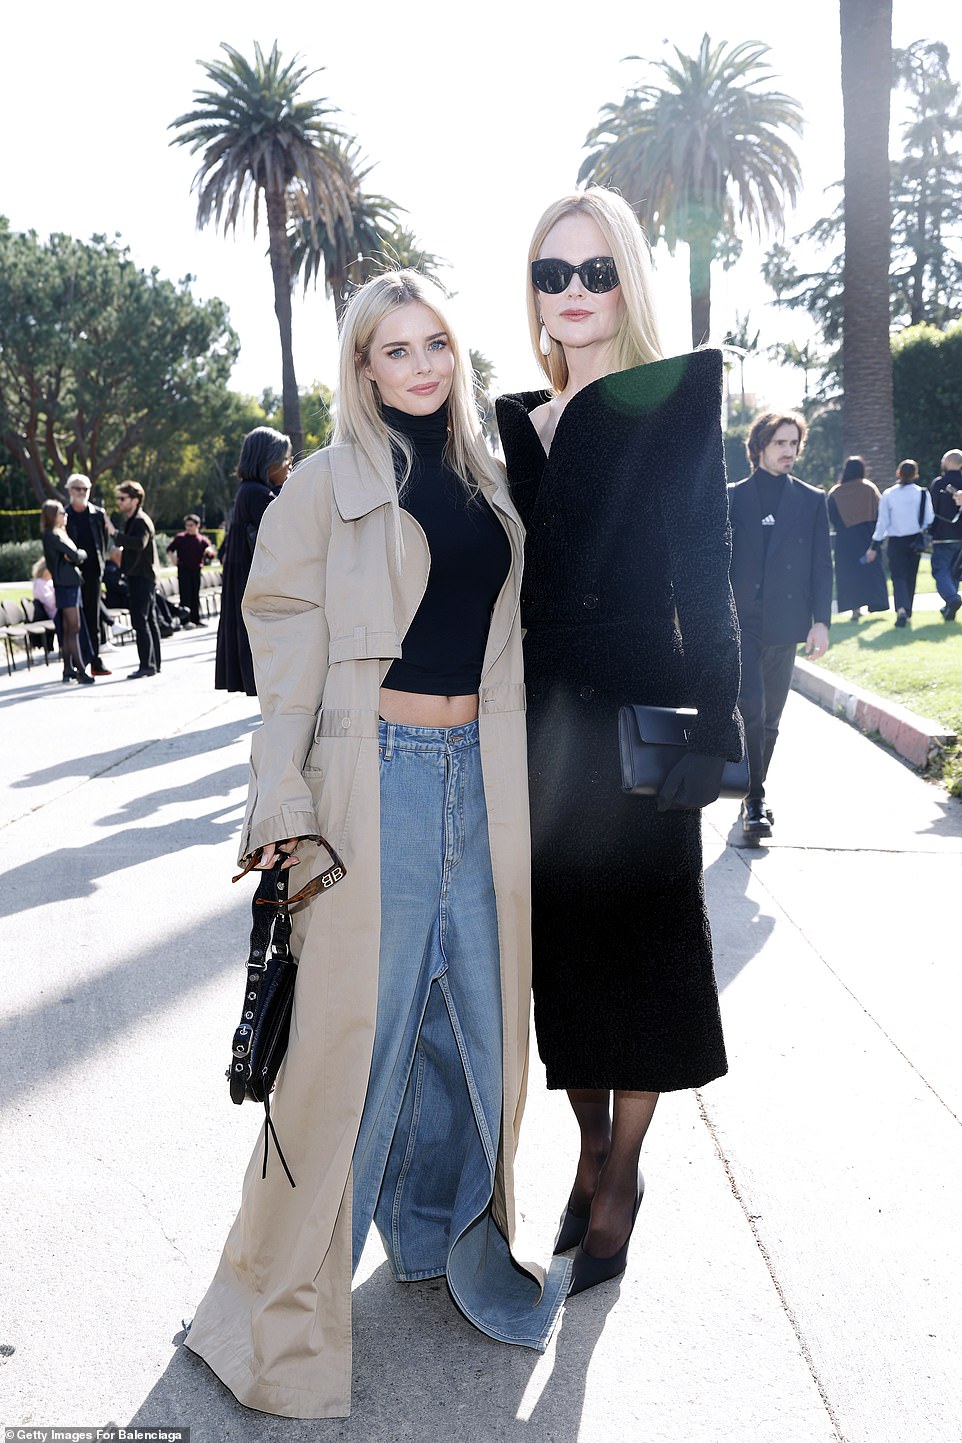 Ahead of the show, Kidman also posed for a photo with actress Samara Weaving, 31 — who donned a cropped, black turtleneck top as well as oversize denim jeans and a floor-sweeping trench coat